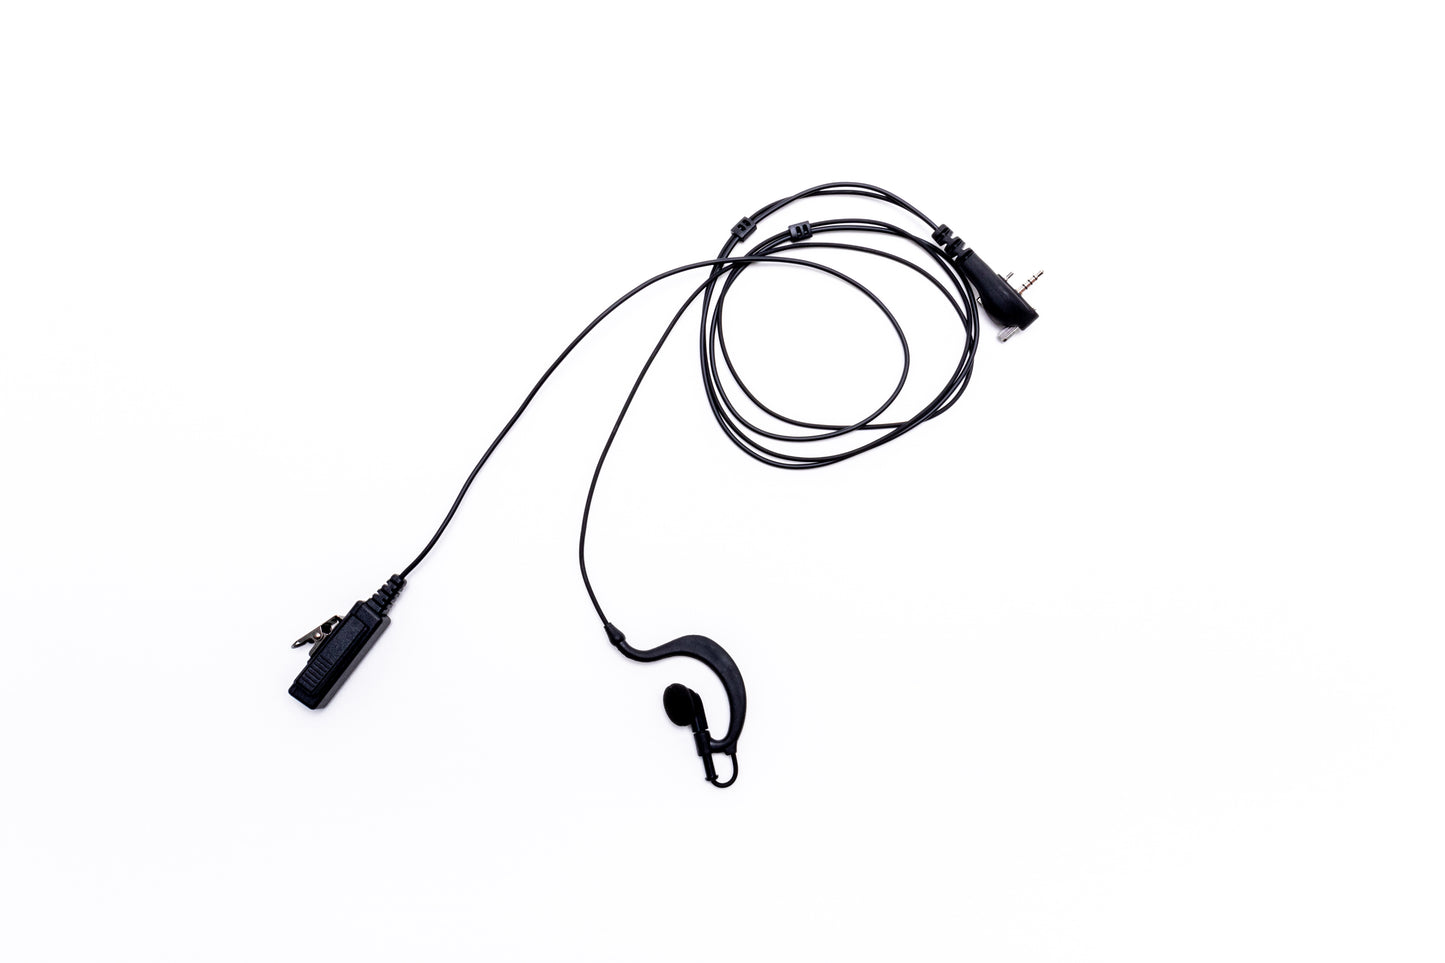 Platinum Series 2-Wire Surveillance Kit for Two-Way Radio with Ear Hanger with Ear Bud